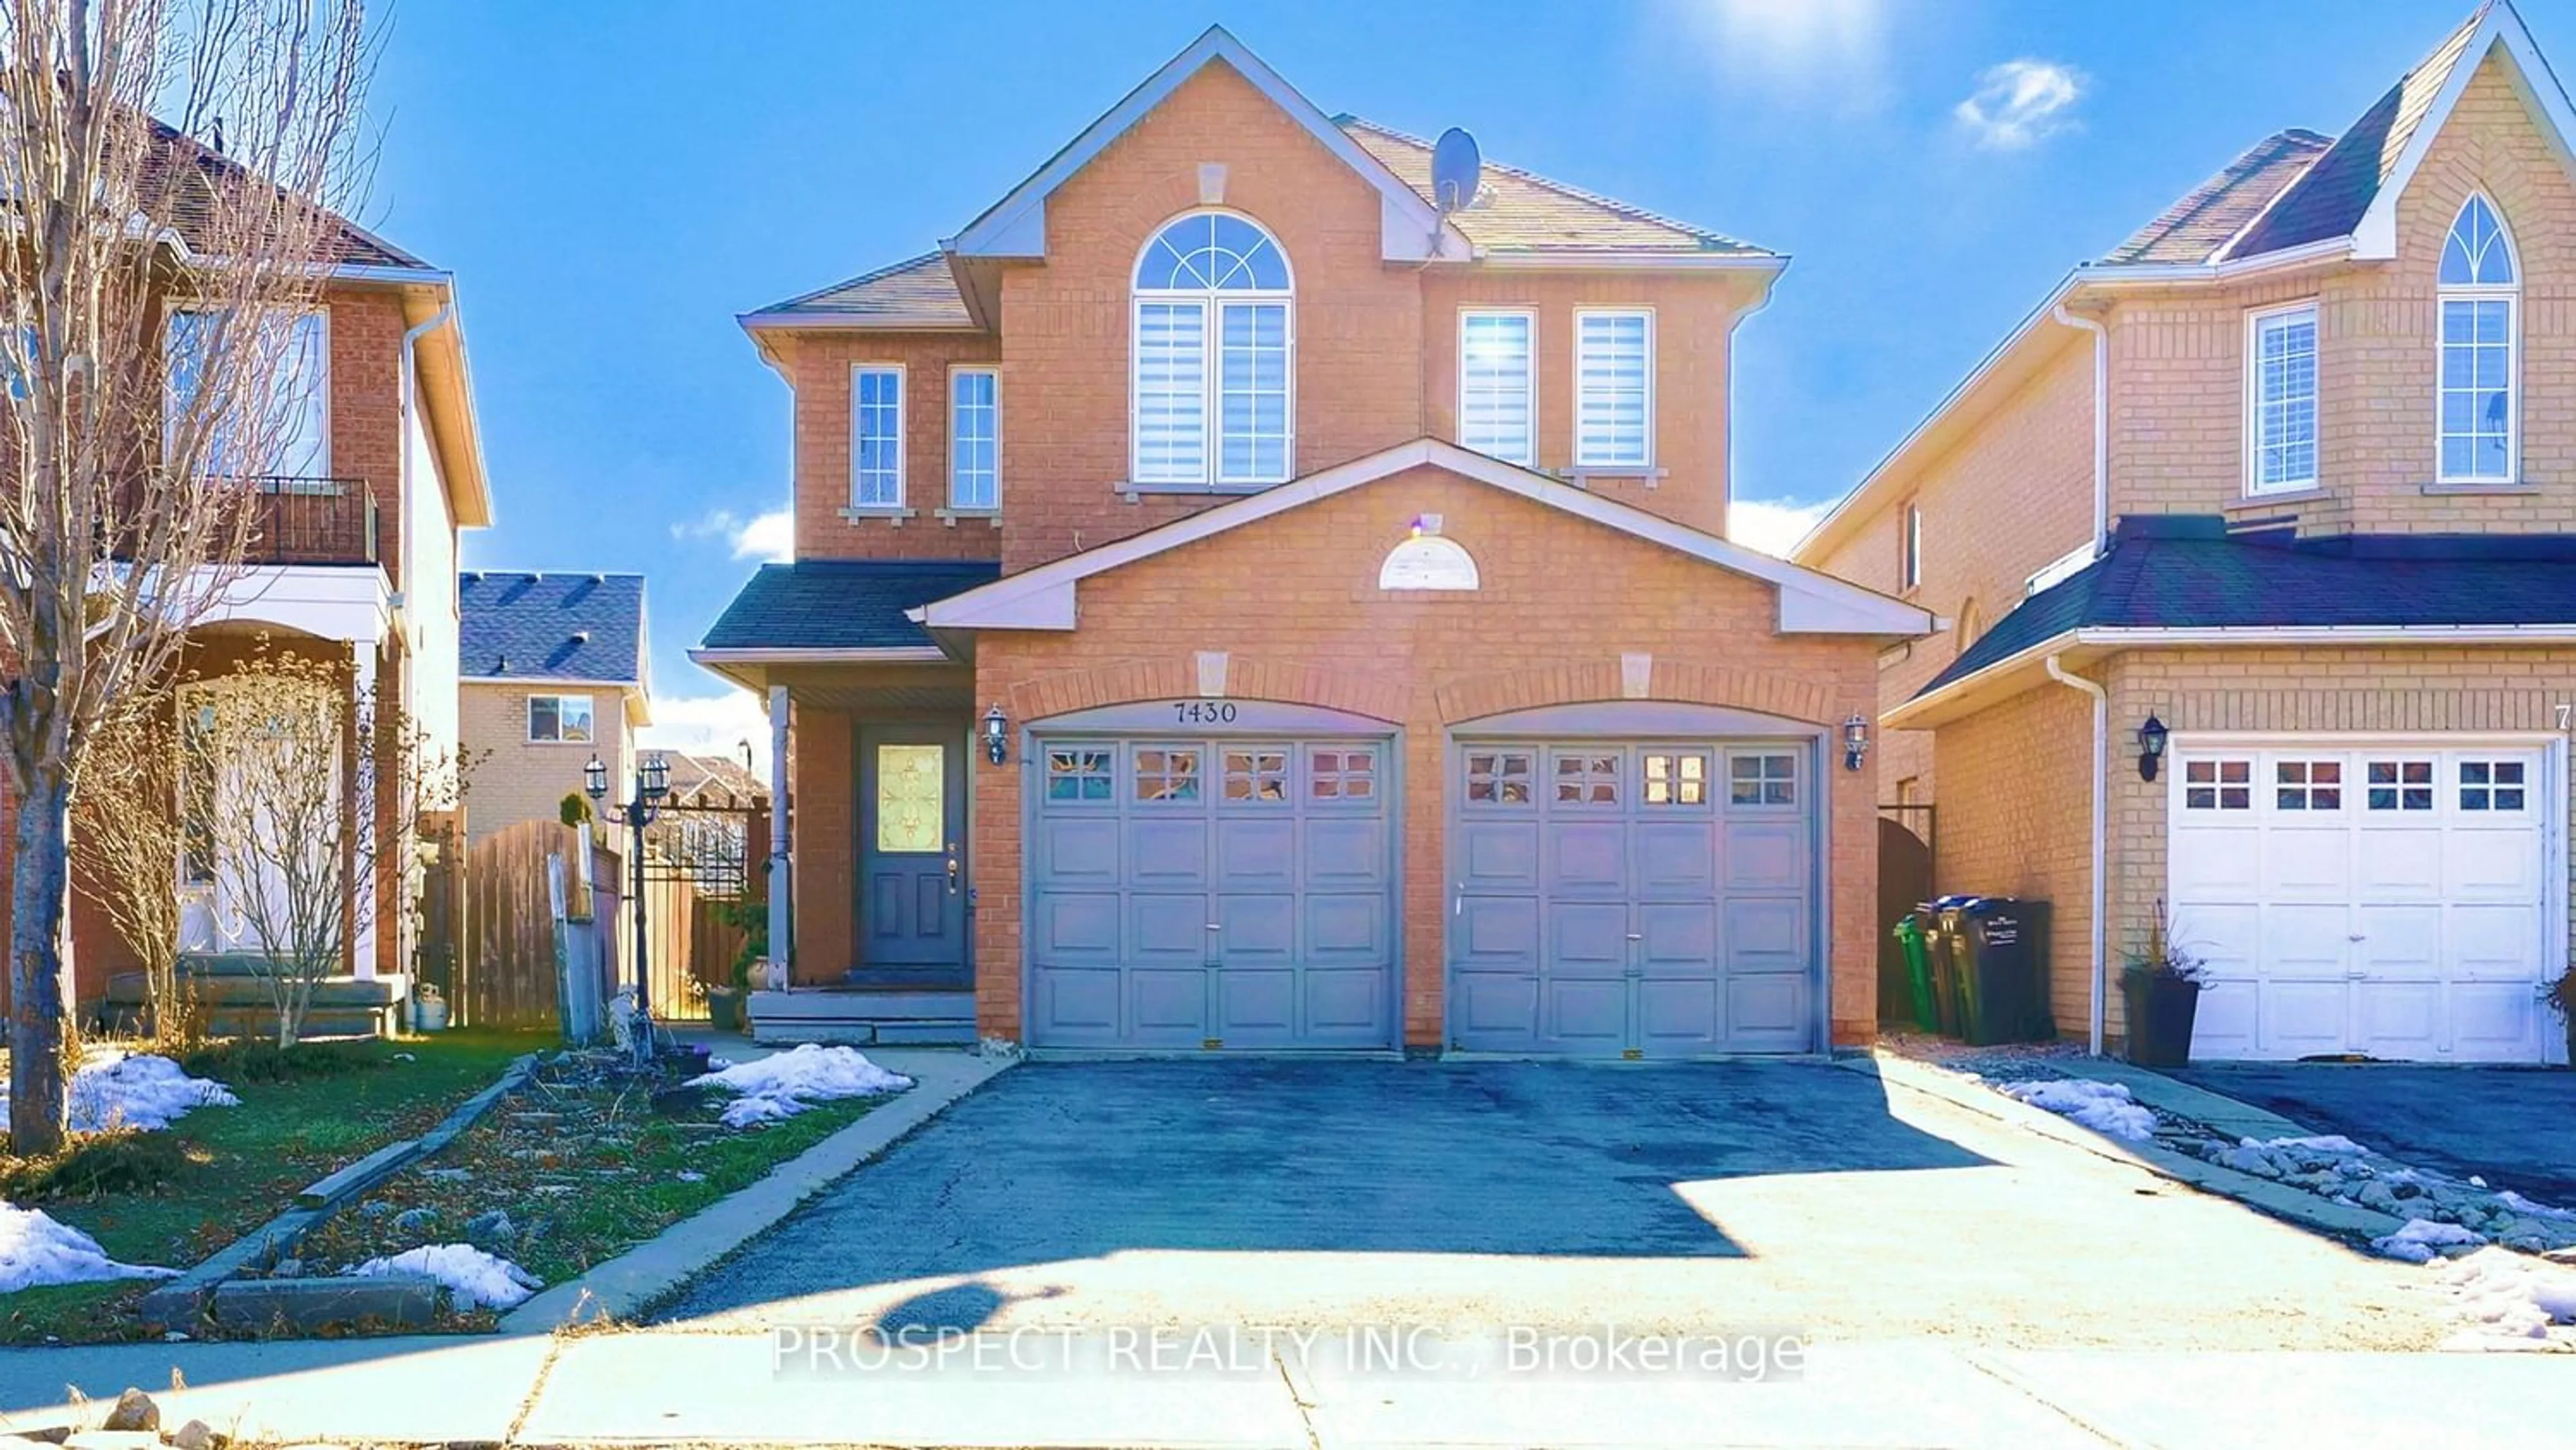 Home with unknown exterior material for 7430 Village Walk, Mississauga Ontario L5W 1V7